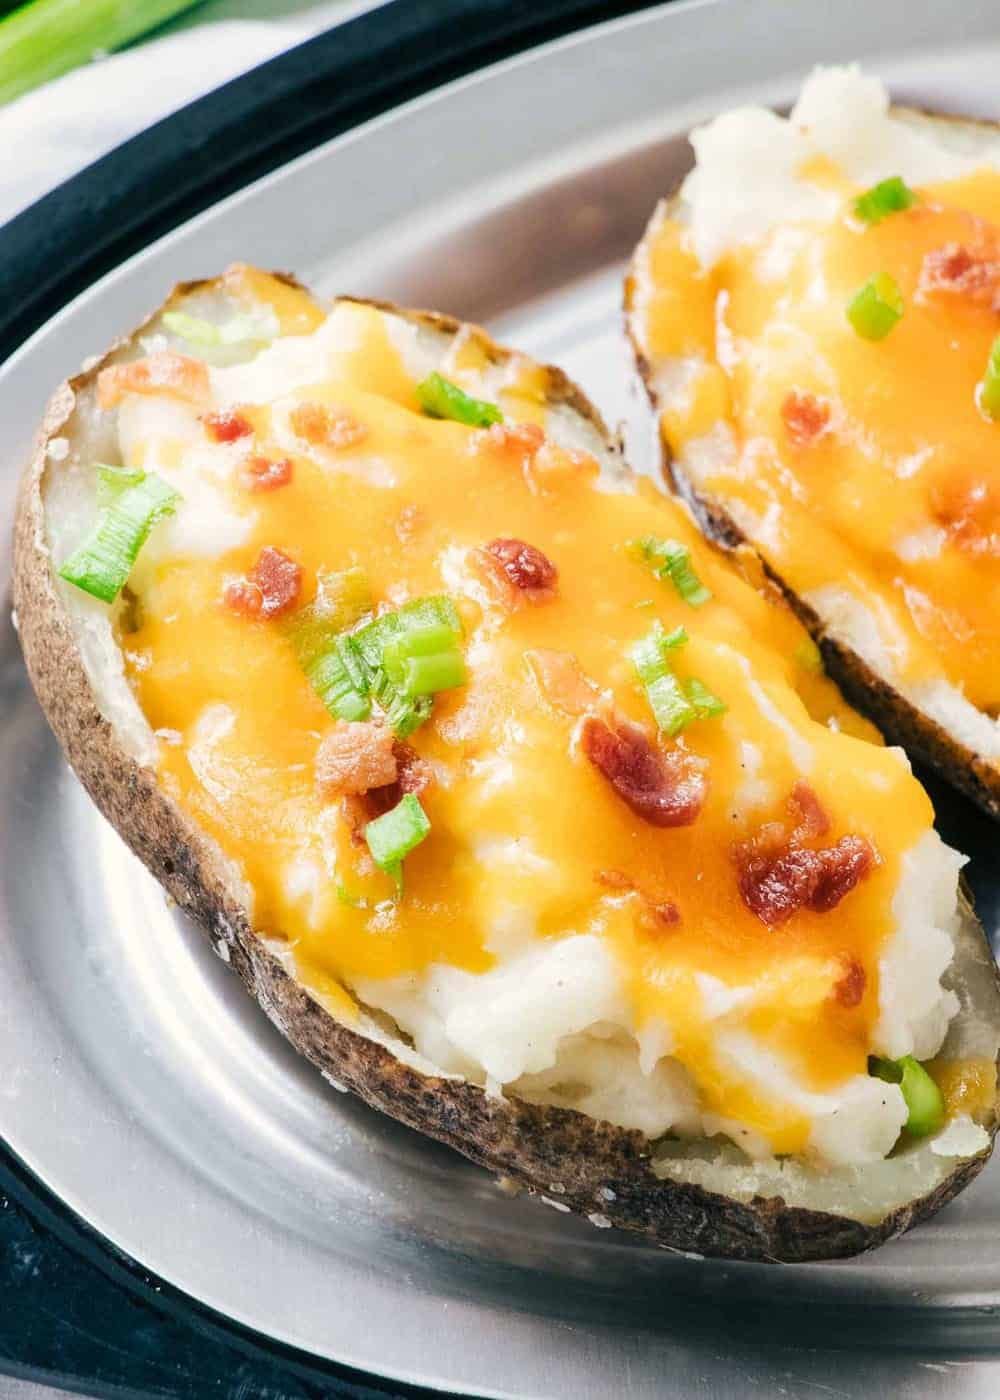 twice baked potato with cheese, bacon bits and green onions 